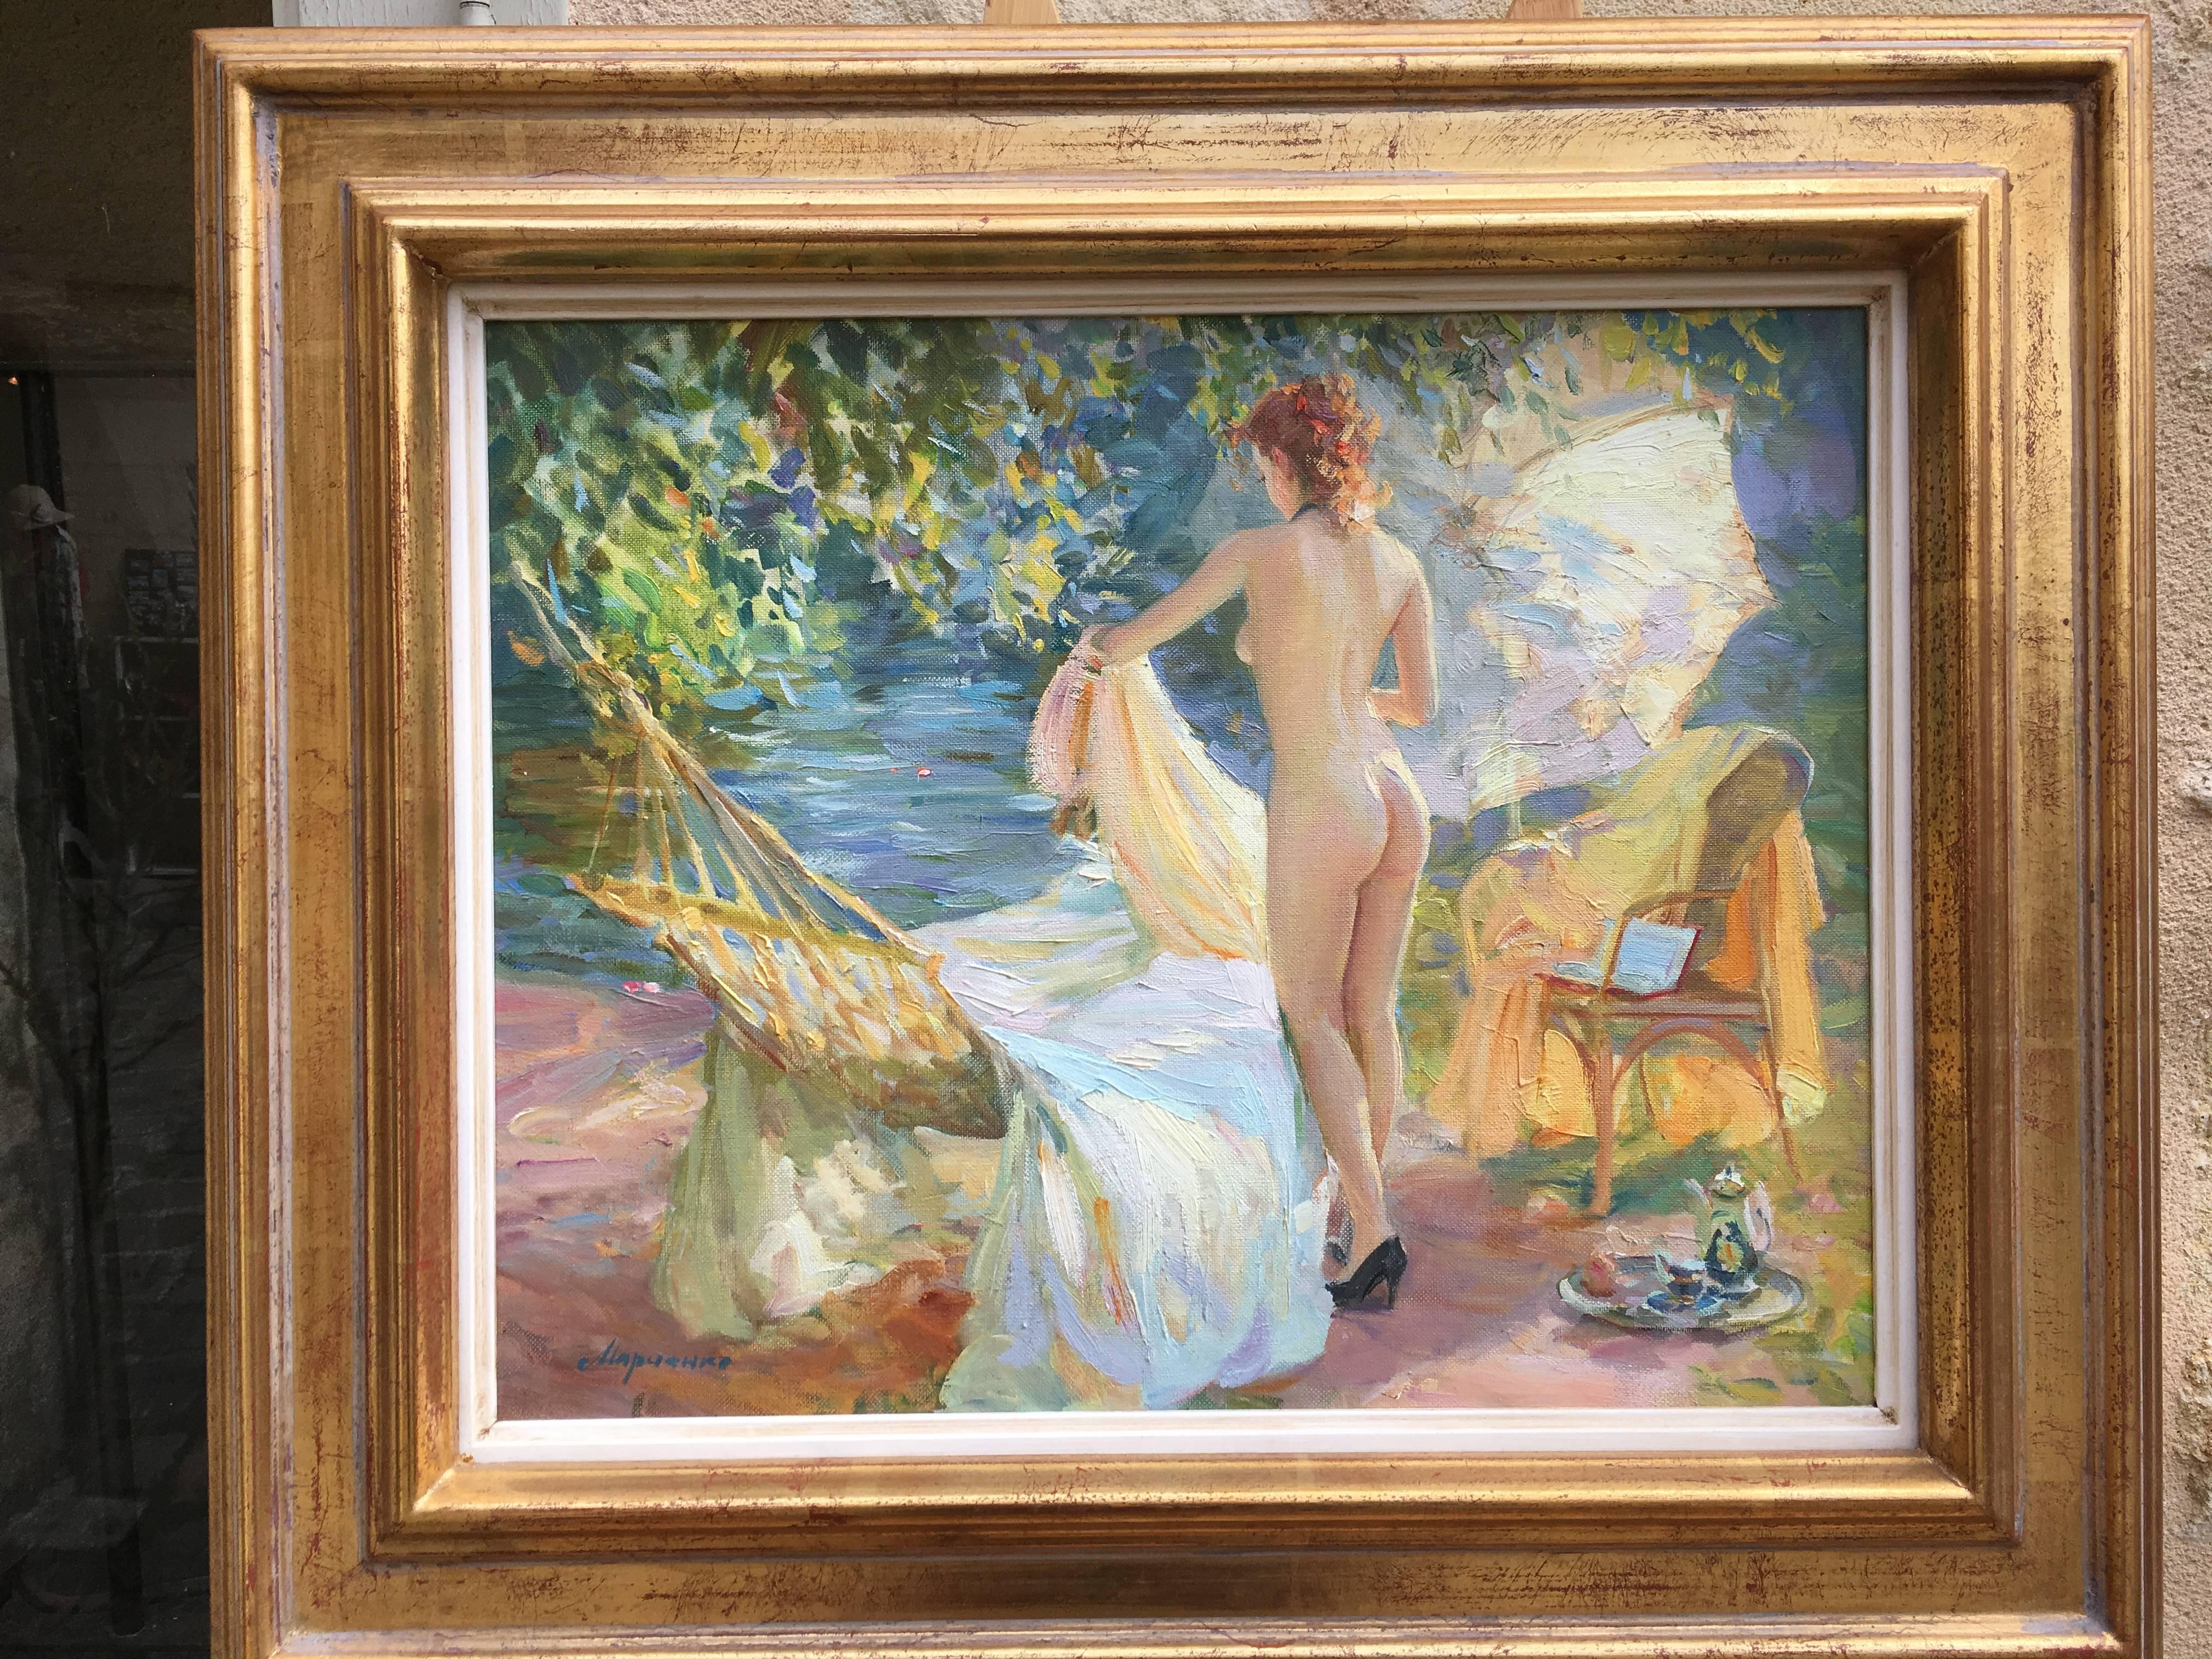 Sunbathing by the river, French impressionist landscape 4